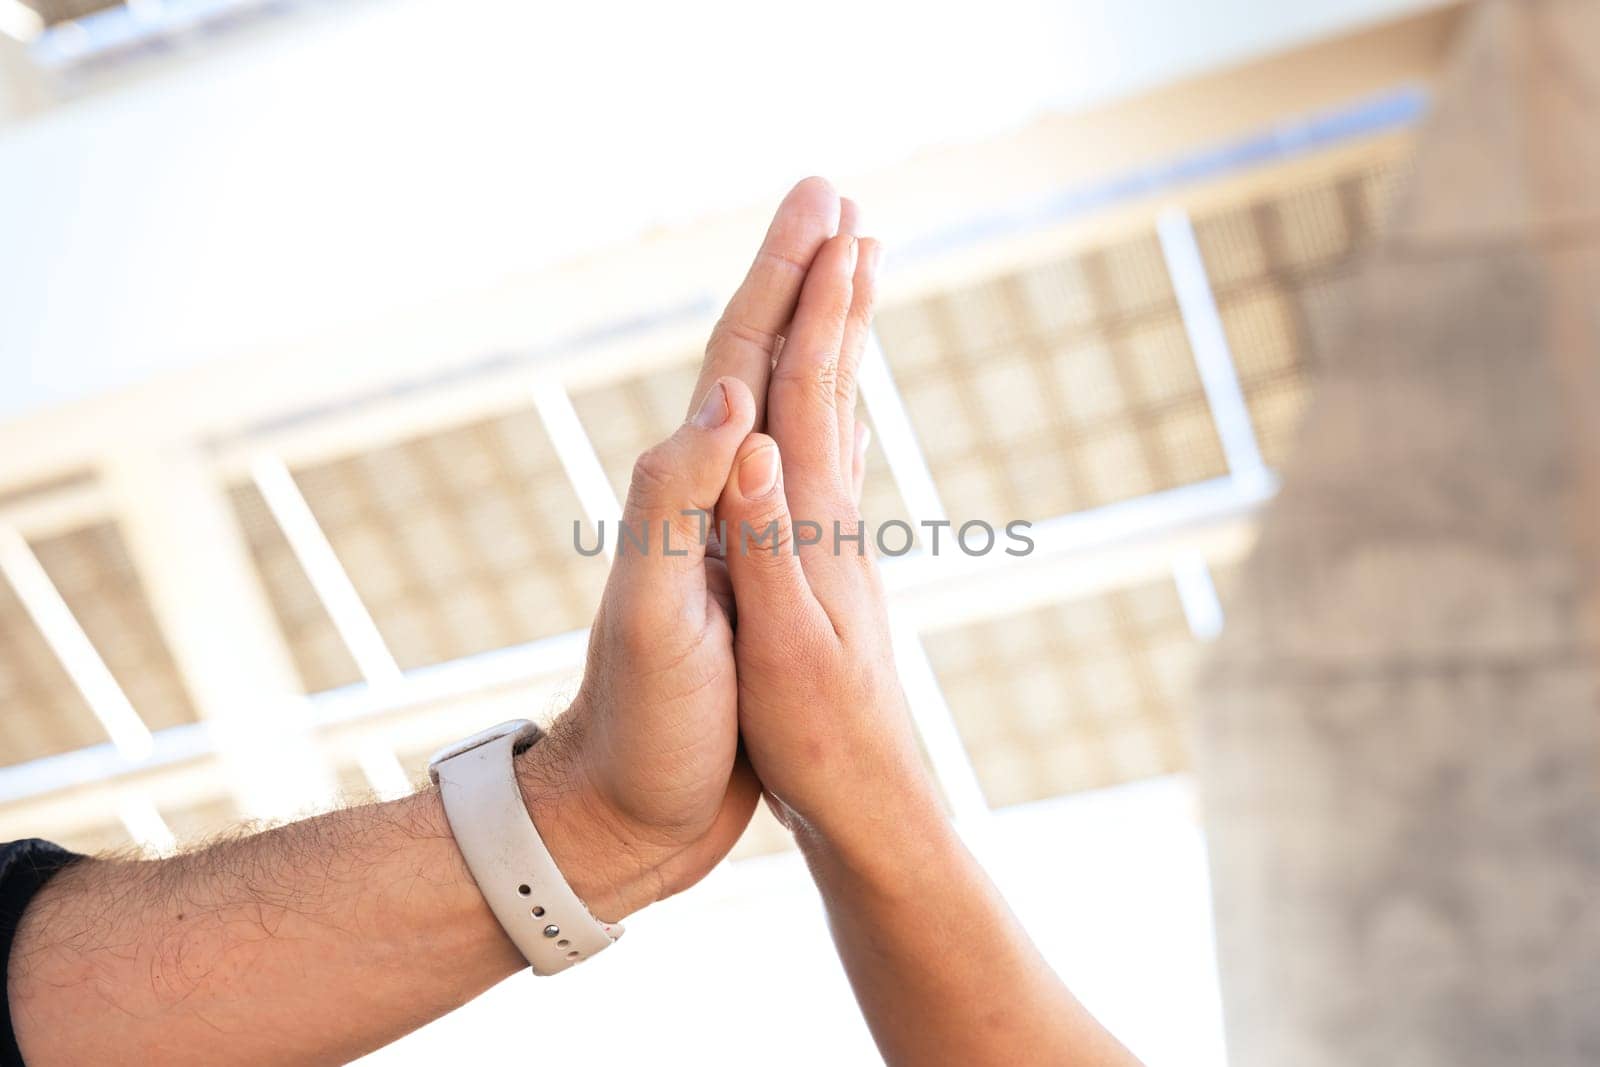 Two friends holding hands. An image of bonding, friendship and trust in friendship. Image of two friends supporting each other.